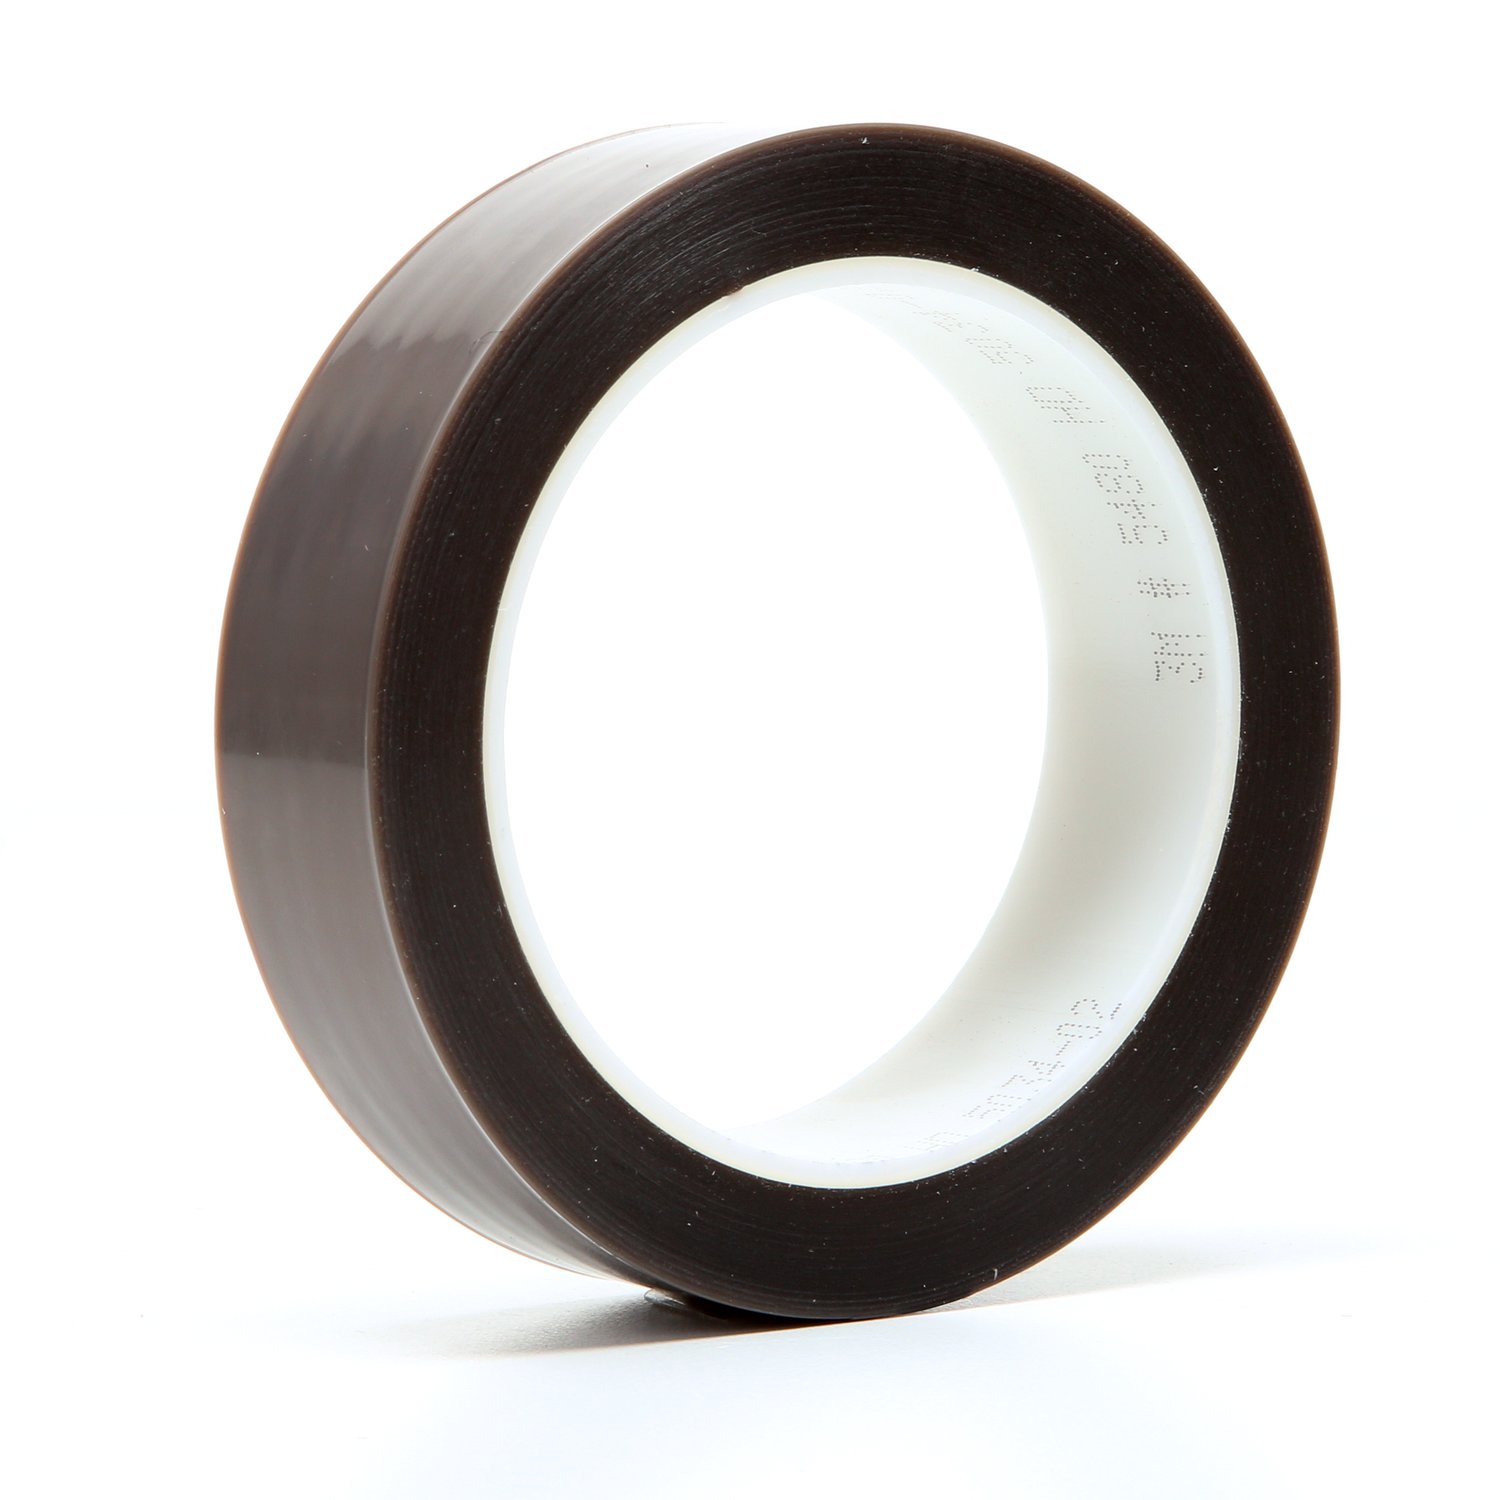 https://www.e-aircraftsupply.com/ItemImages/04/1047958E_3mtm-ptfe-film-tape-5480-gray-1-in-x-36-yd-3-8-mil.jpg